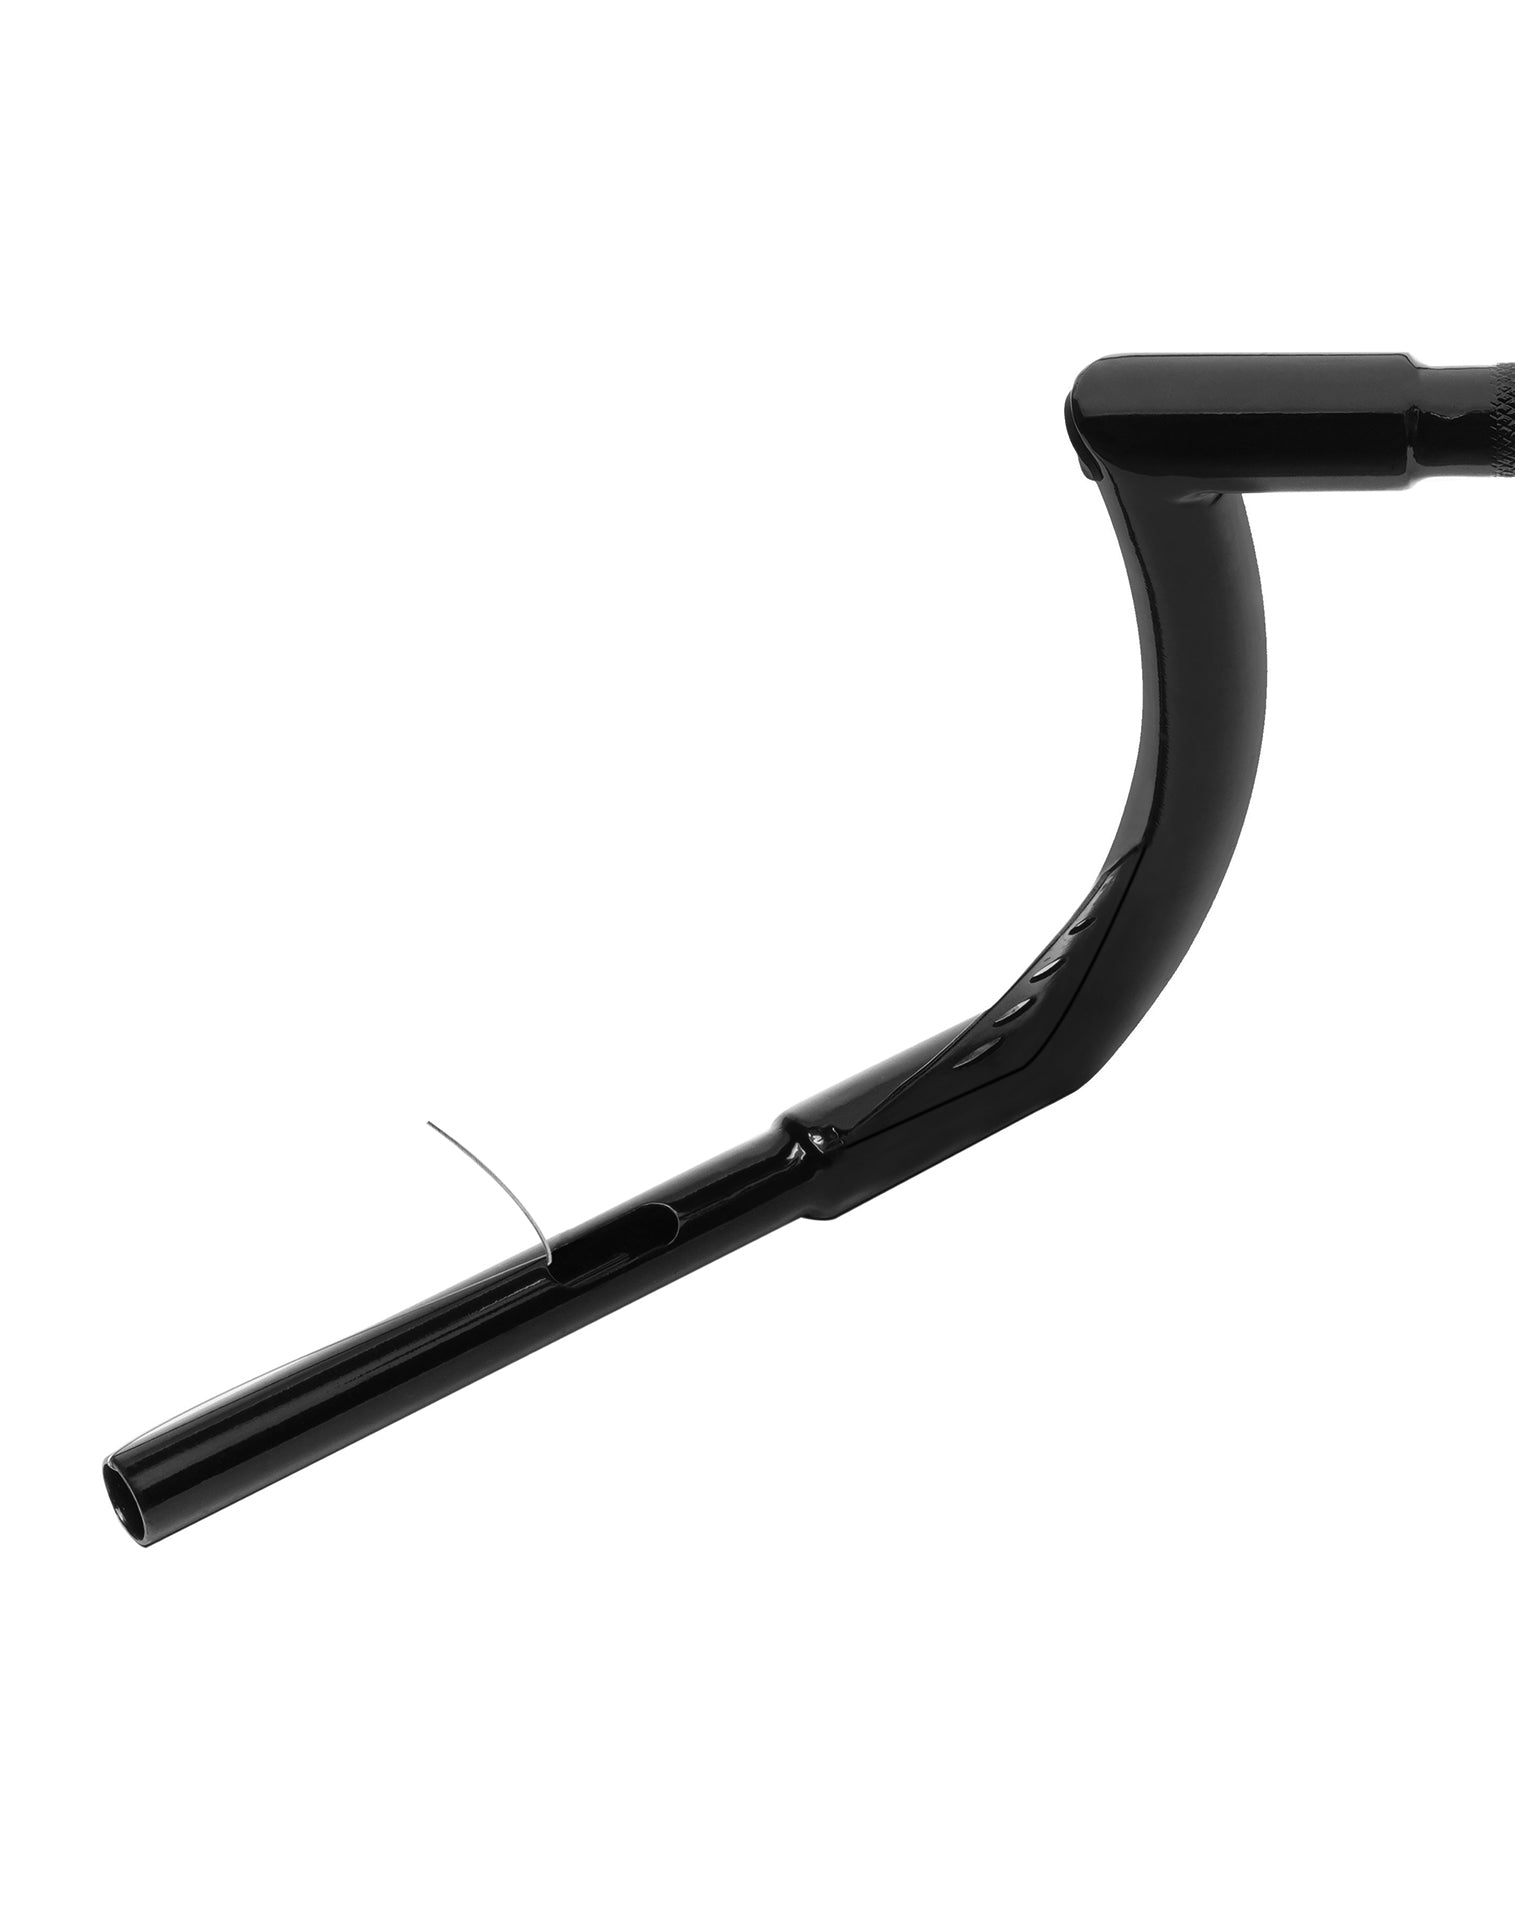 Viking Iron Born 12" Handlebar For Harley Dyna Super Glide FXD Gloss Black Close Up View